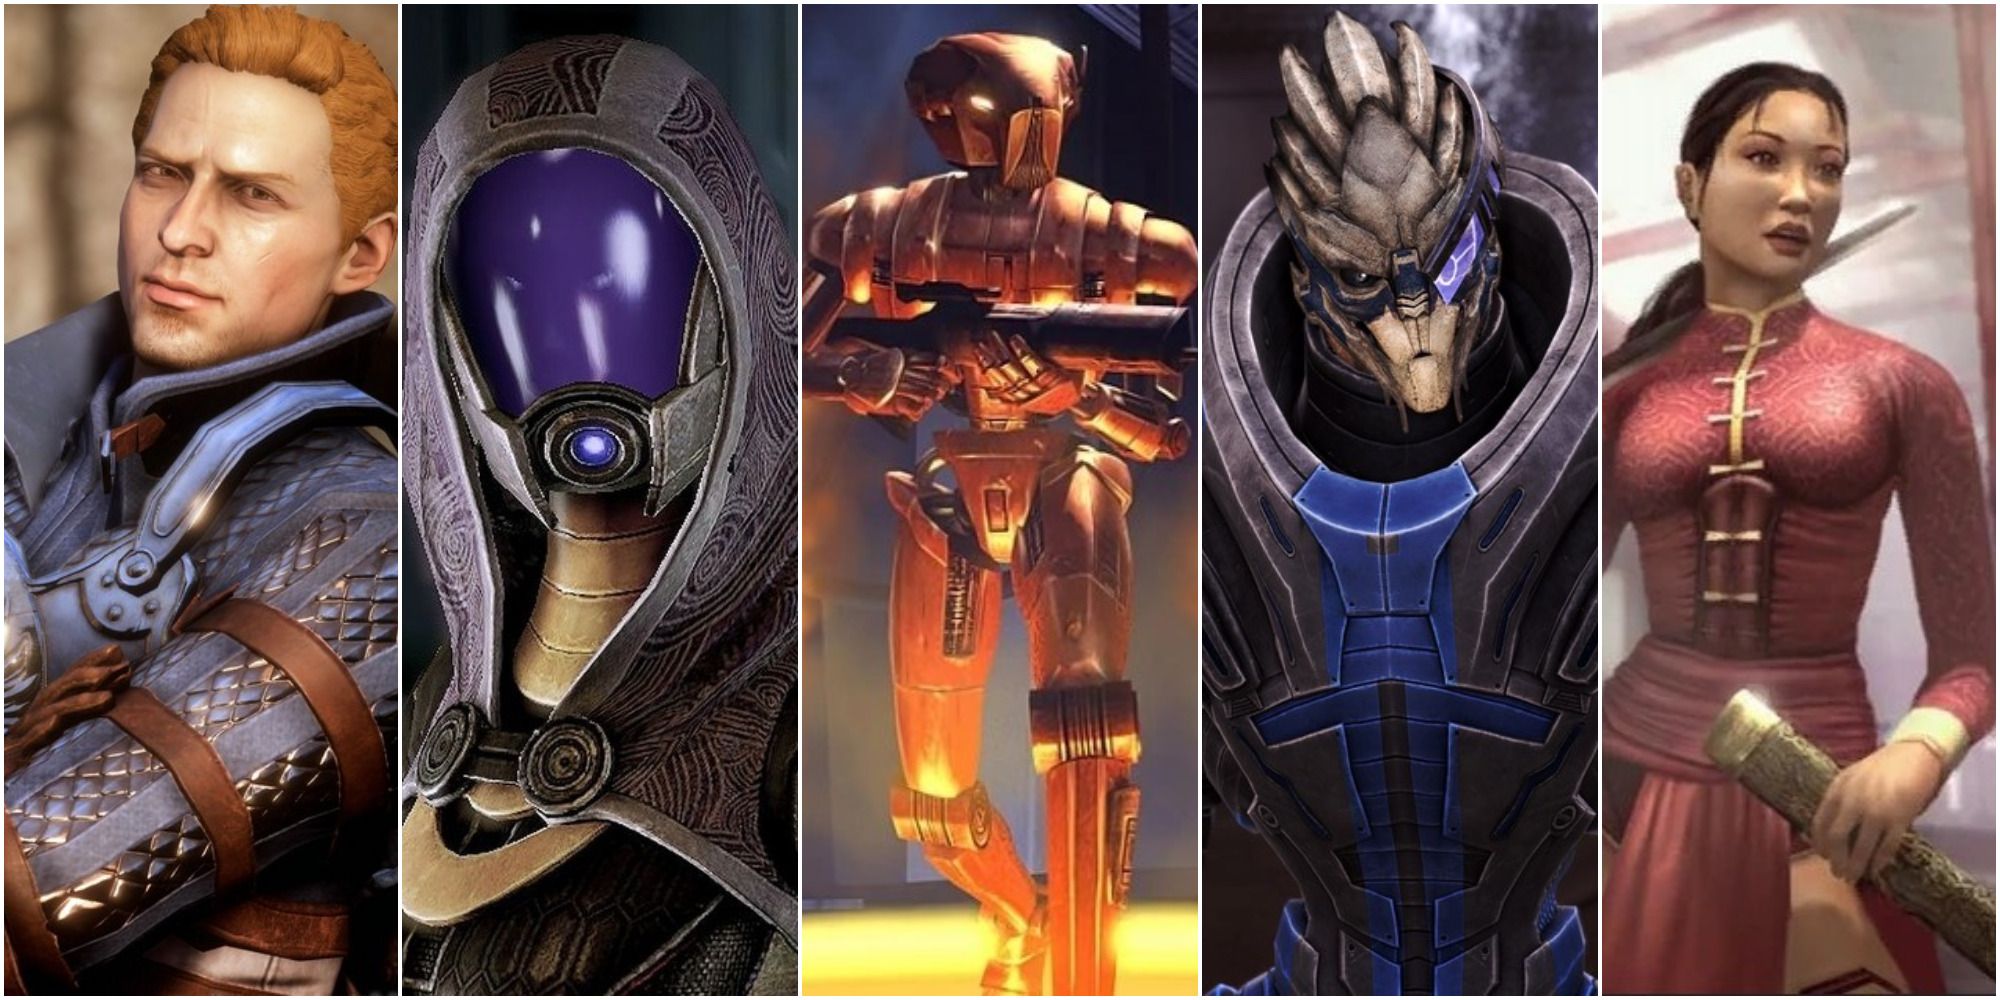 split image of characters from bioware titles